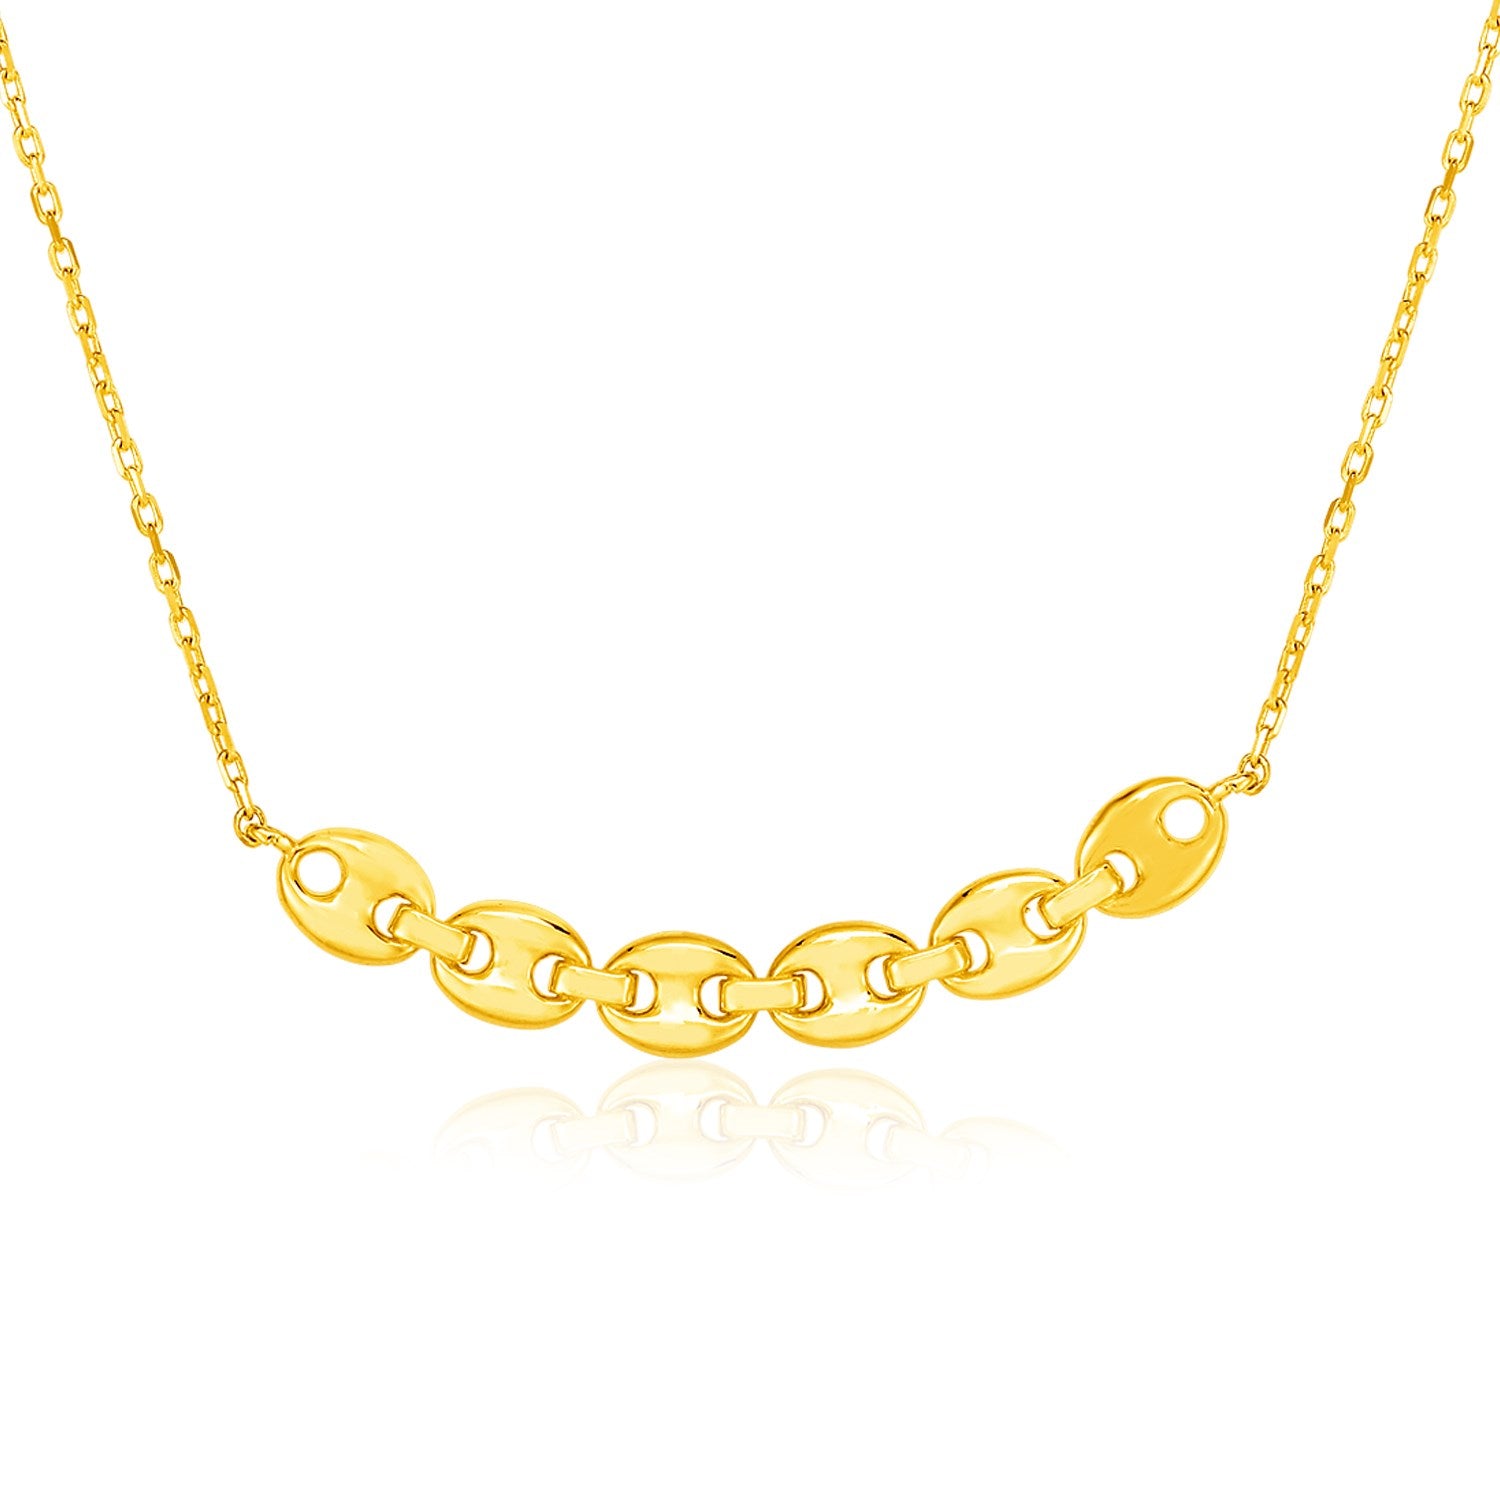 14k Yellow Gold 18 inch Necklace with Curve of Mariner Chain